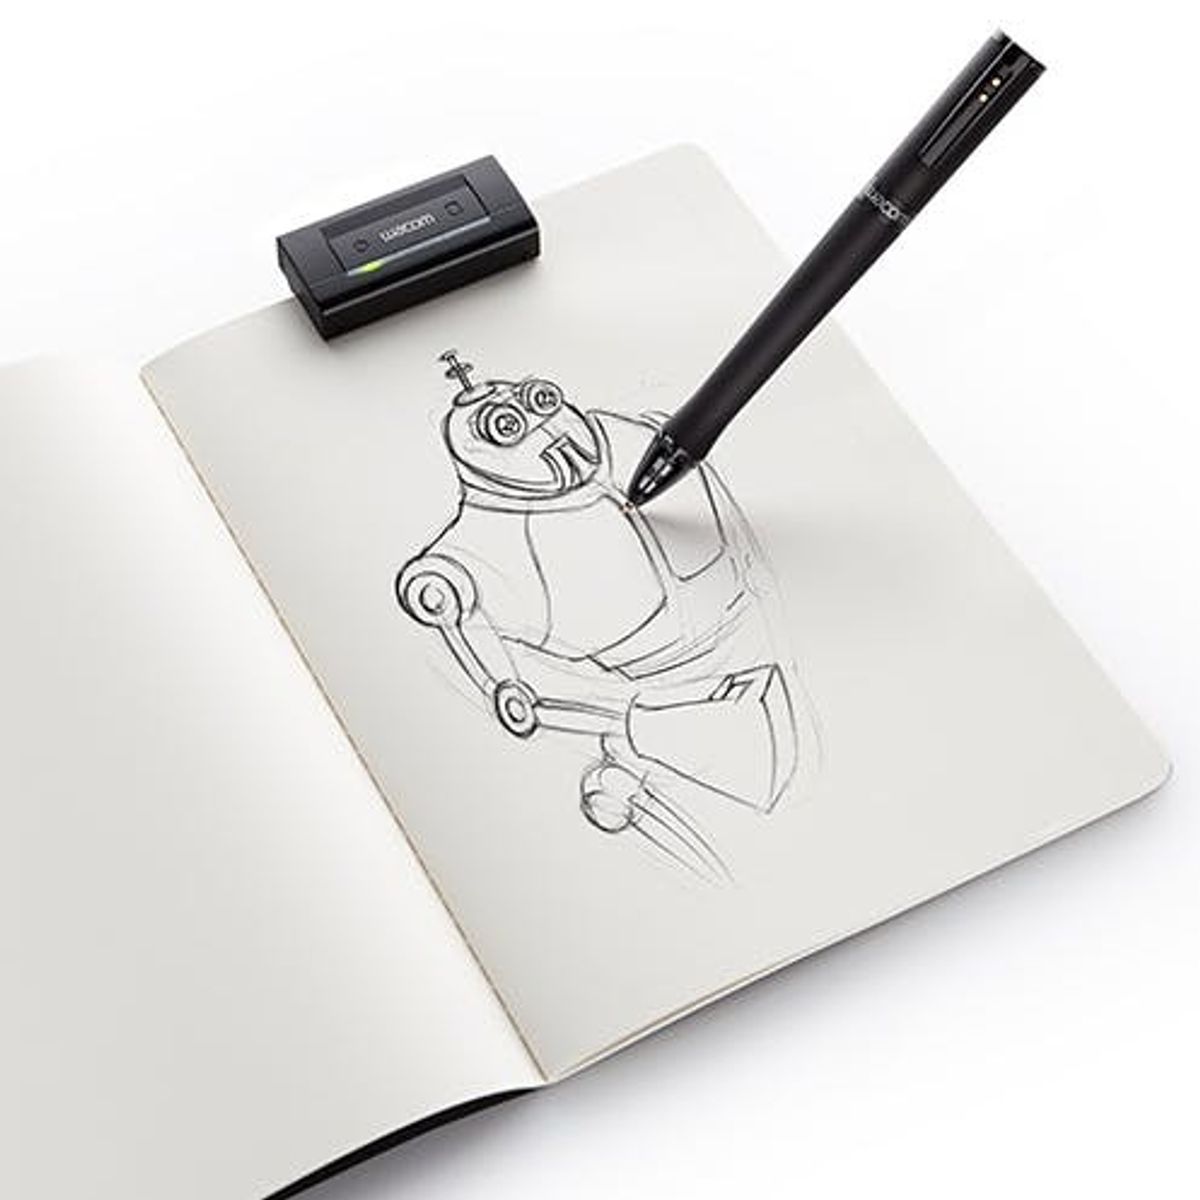 Sketch Decor Ideas & More With The Inkling Digital Pen